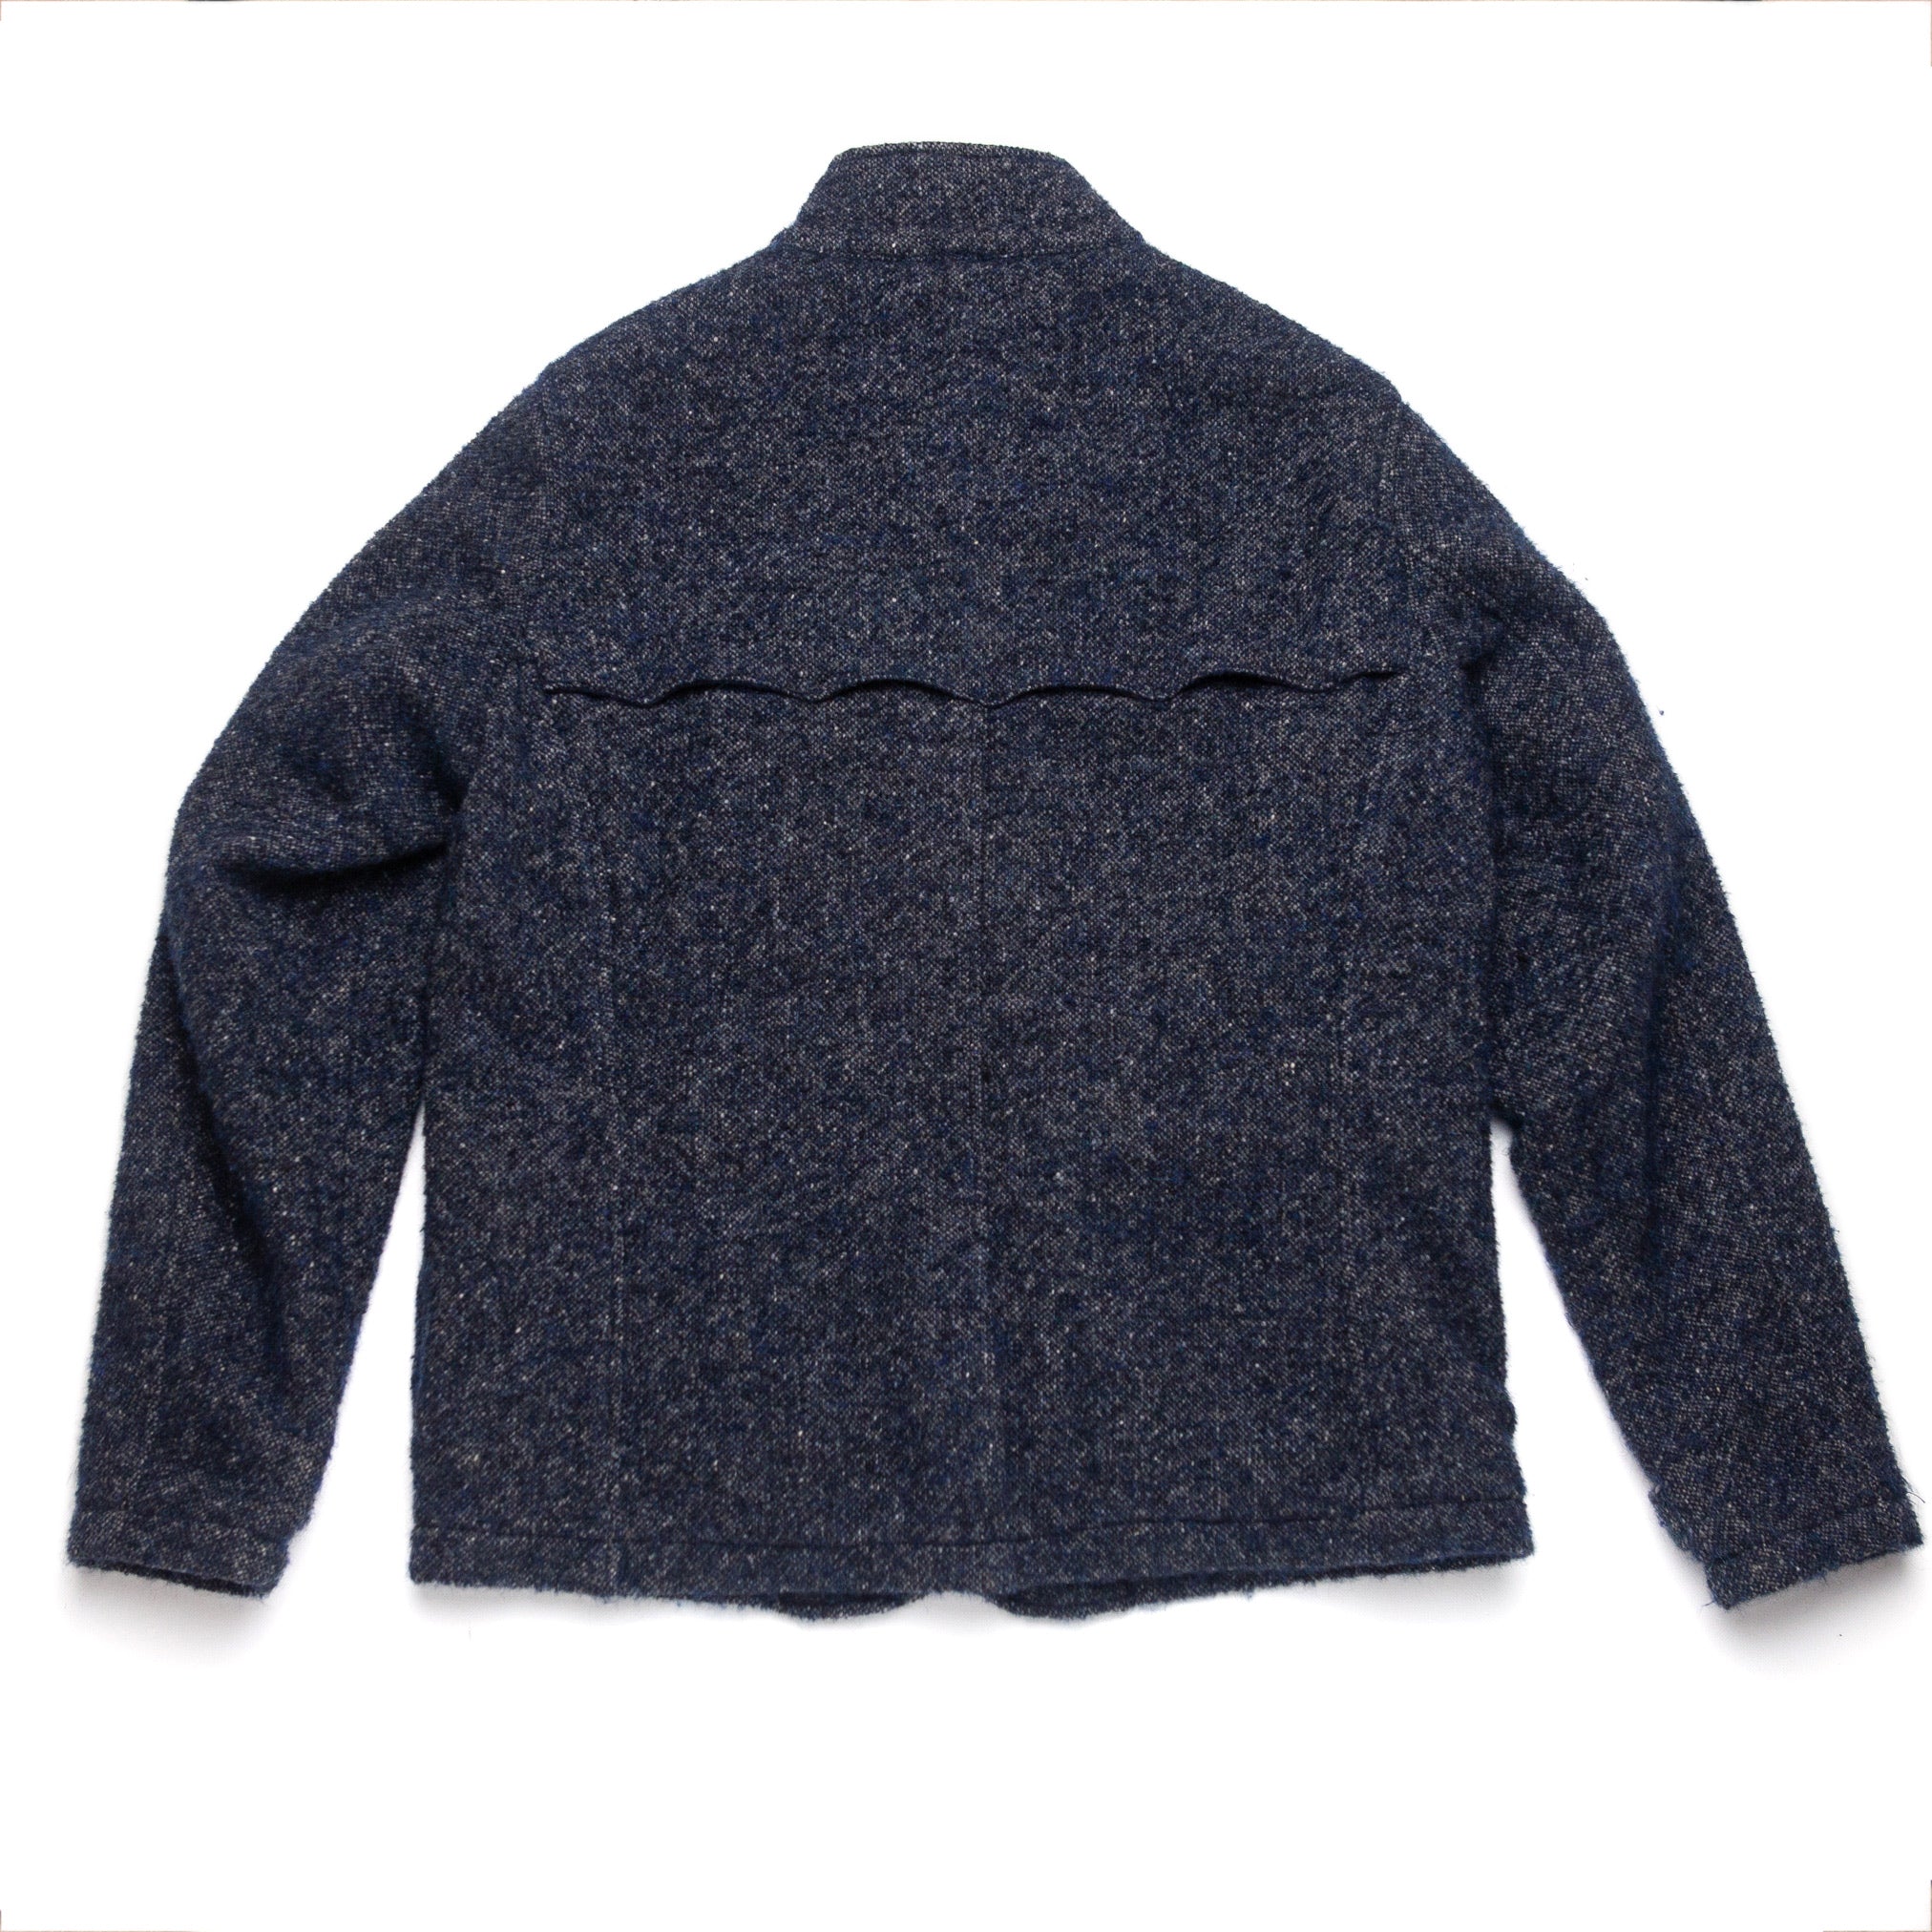 Navy Donegal Curly Tweed Jacket - XL